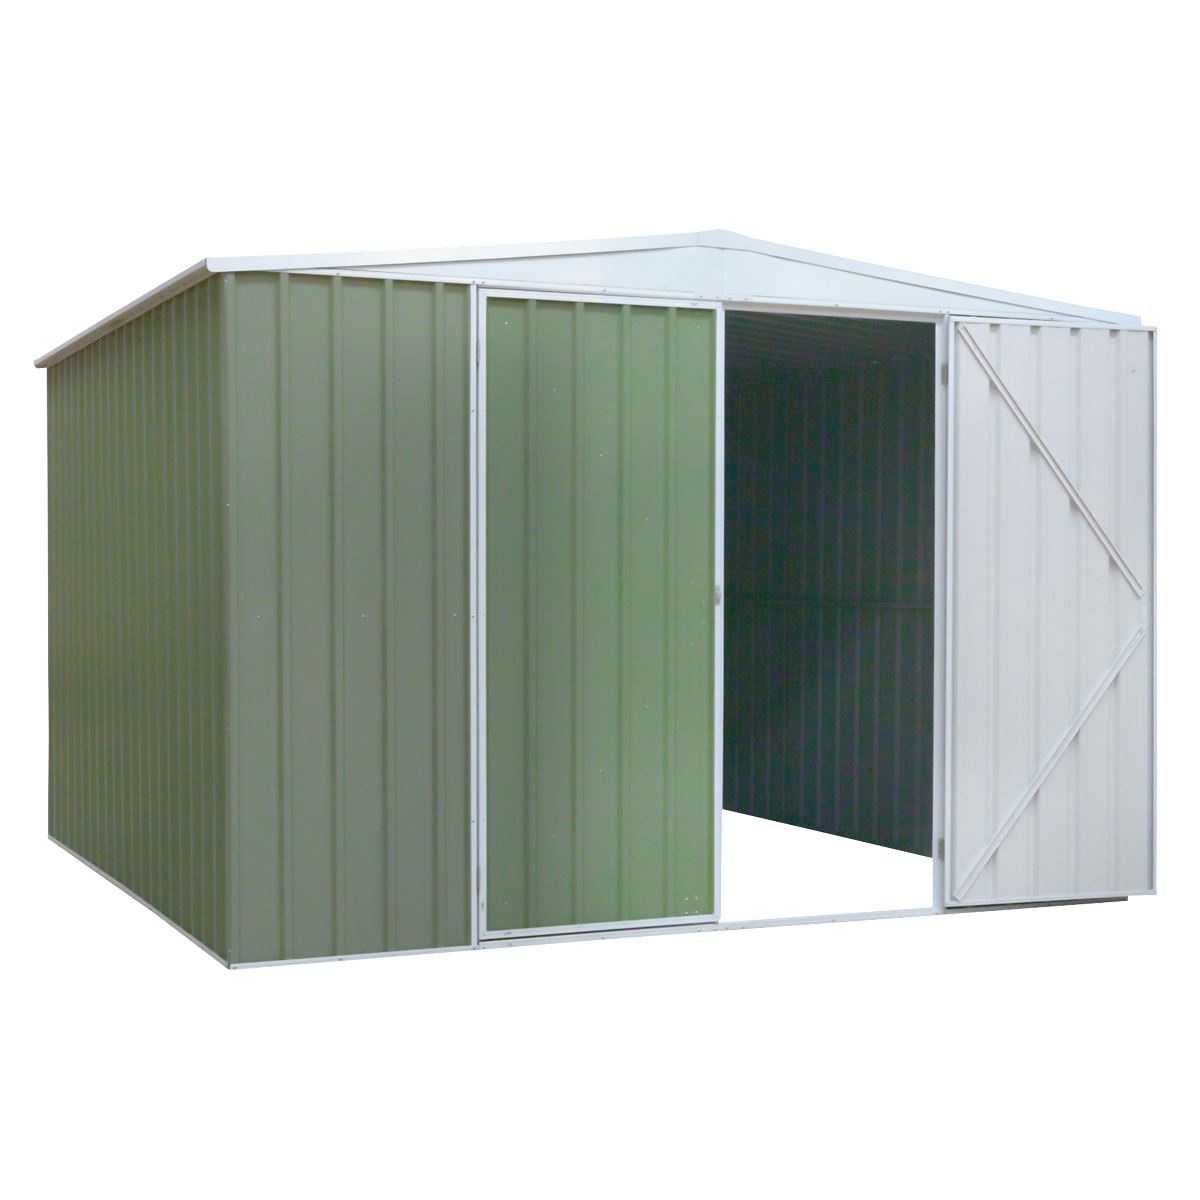 Dellonda Galvanised Steel Metal Garden/Outdoor/Storage Shed, 10FT x 10FT, Apex Style Roof - Green